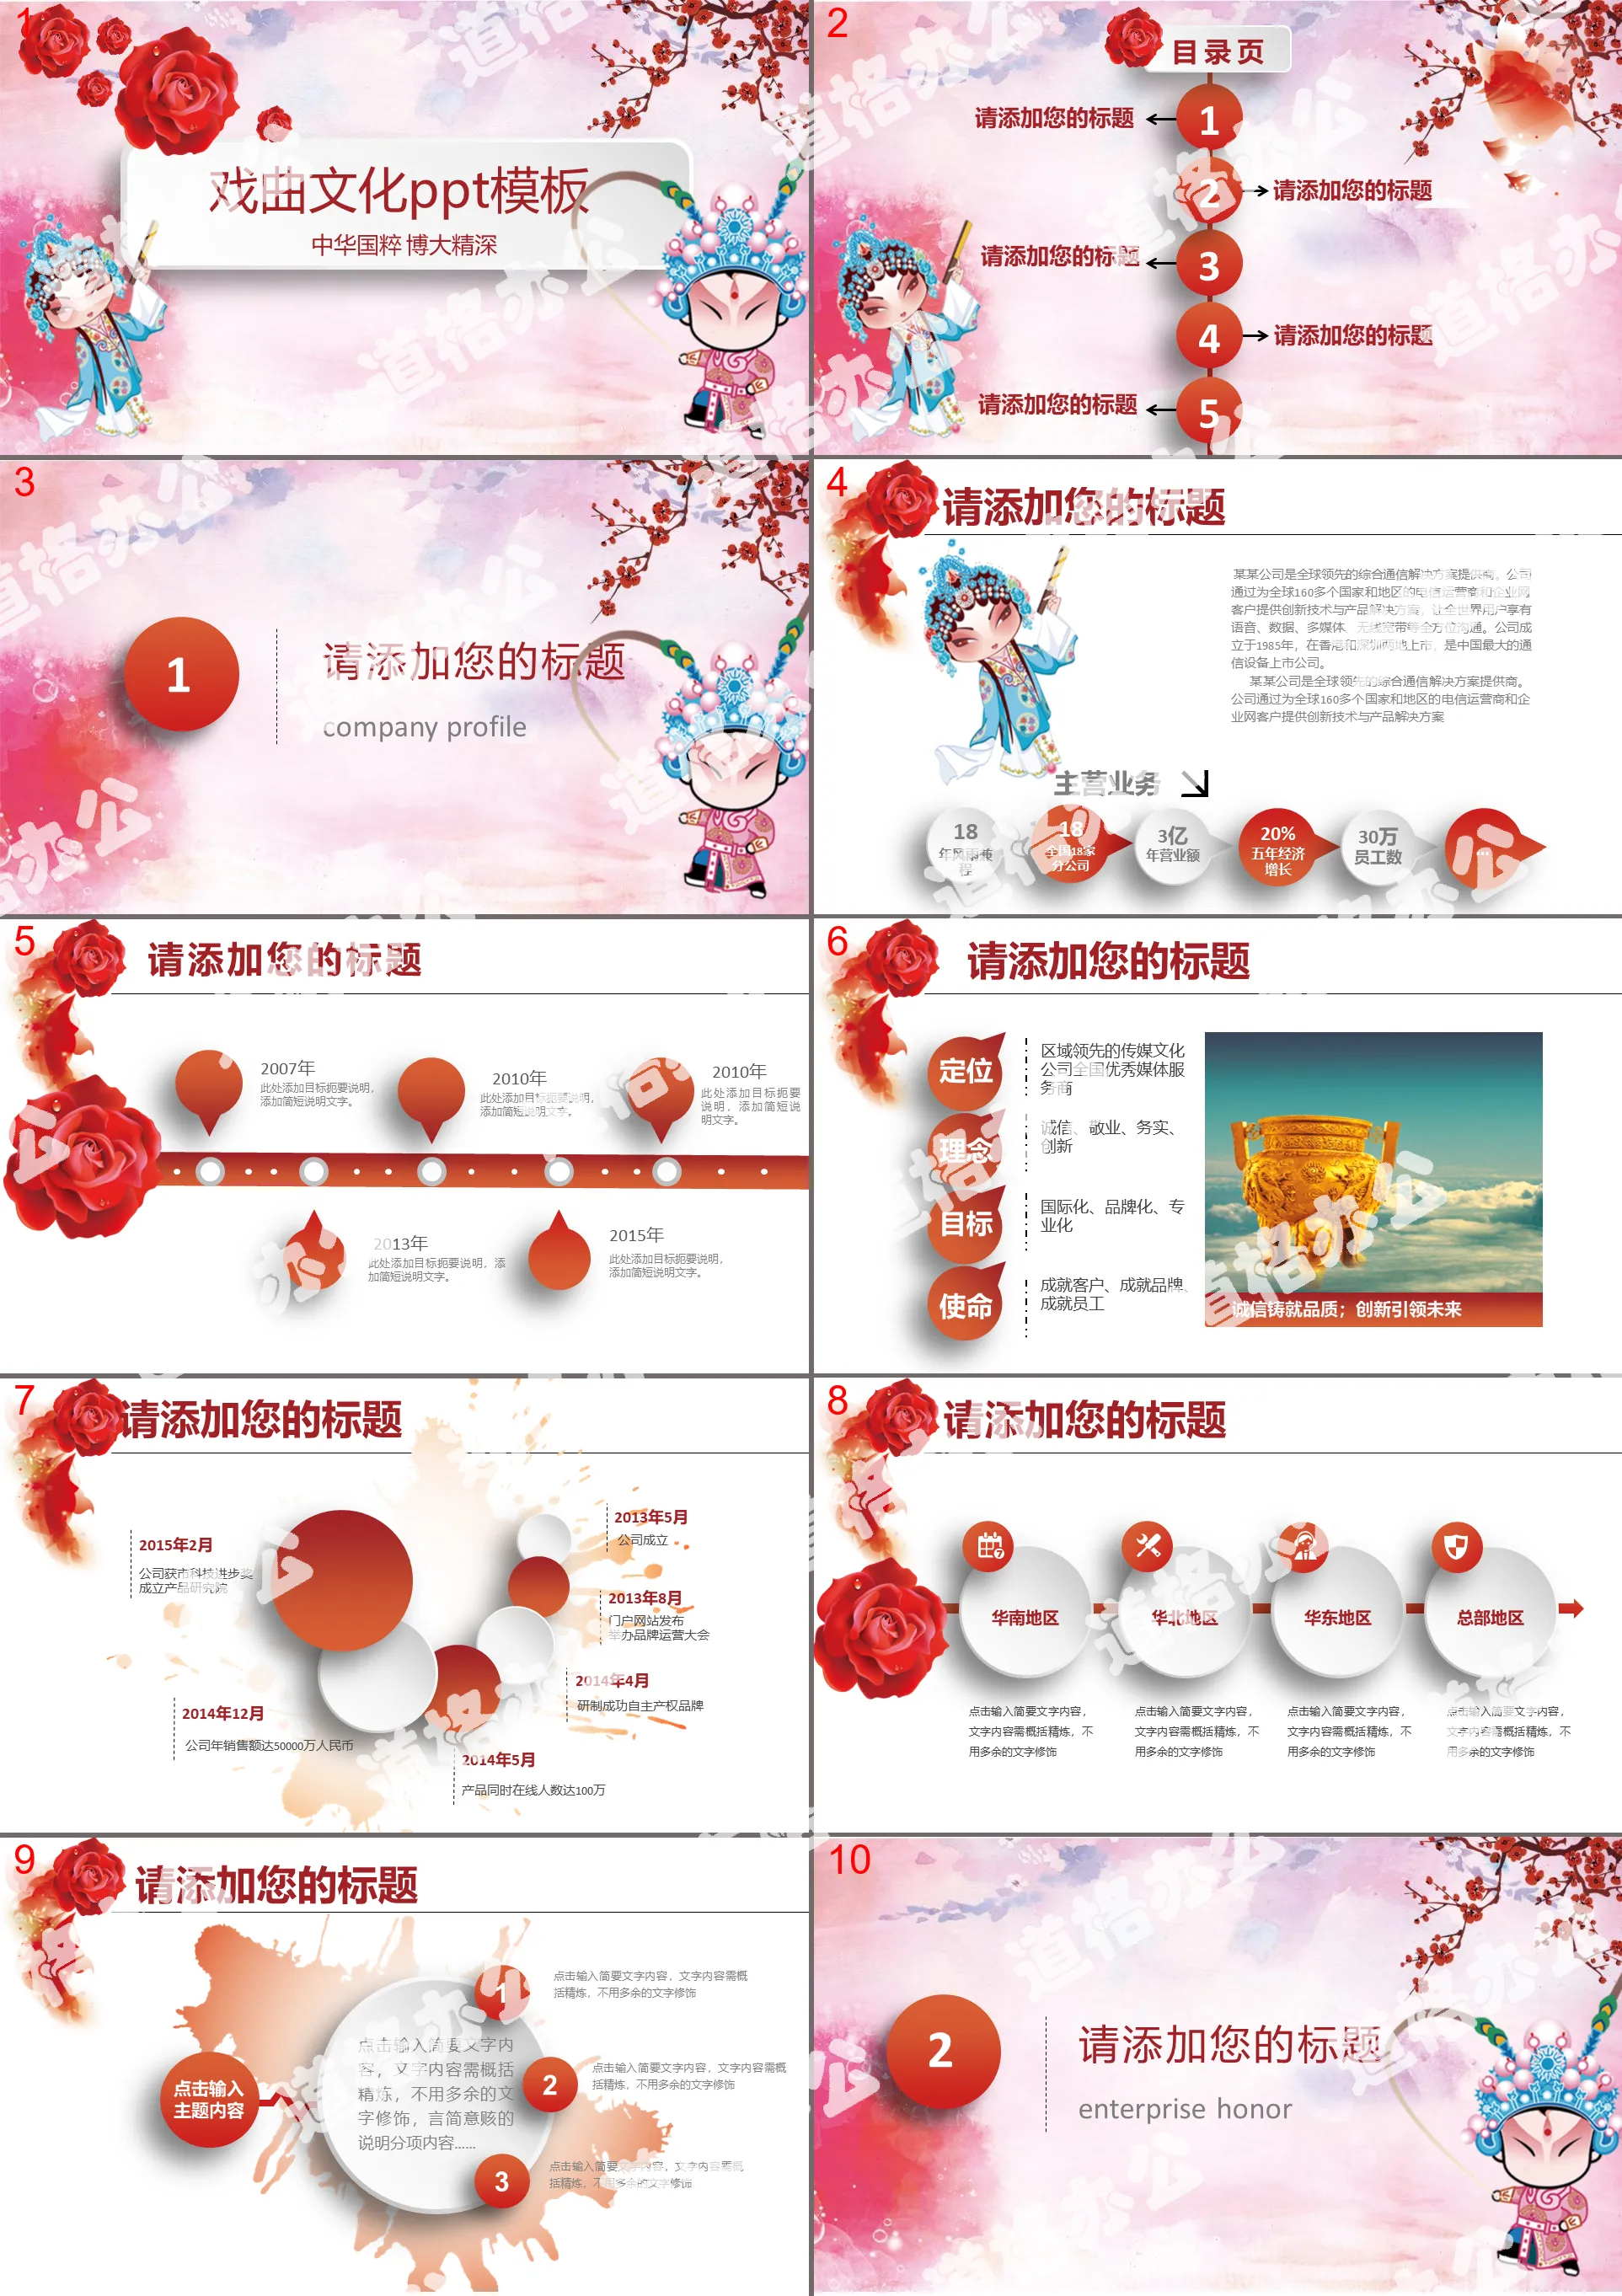 Opera culture theme PPT template with cartoon opera characters background